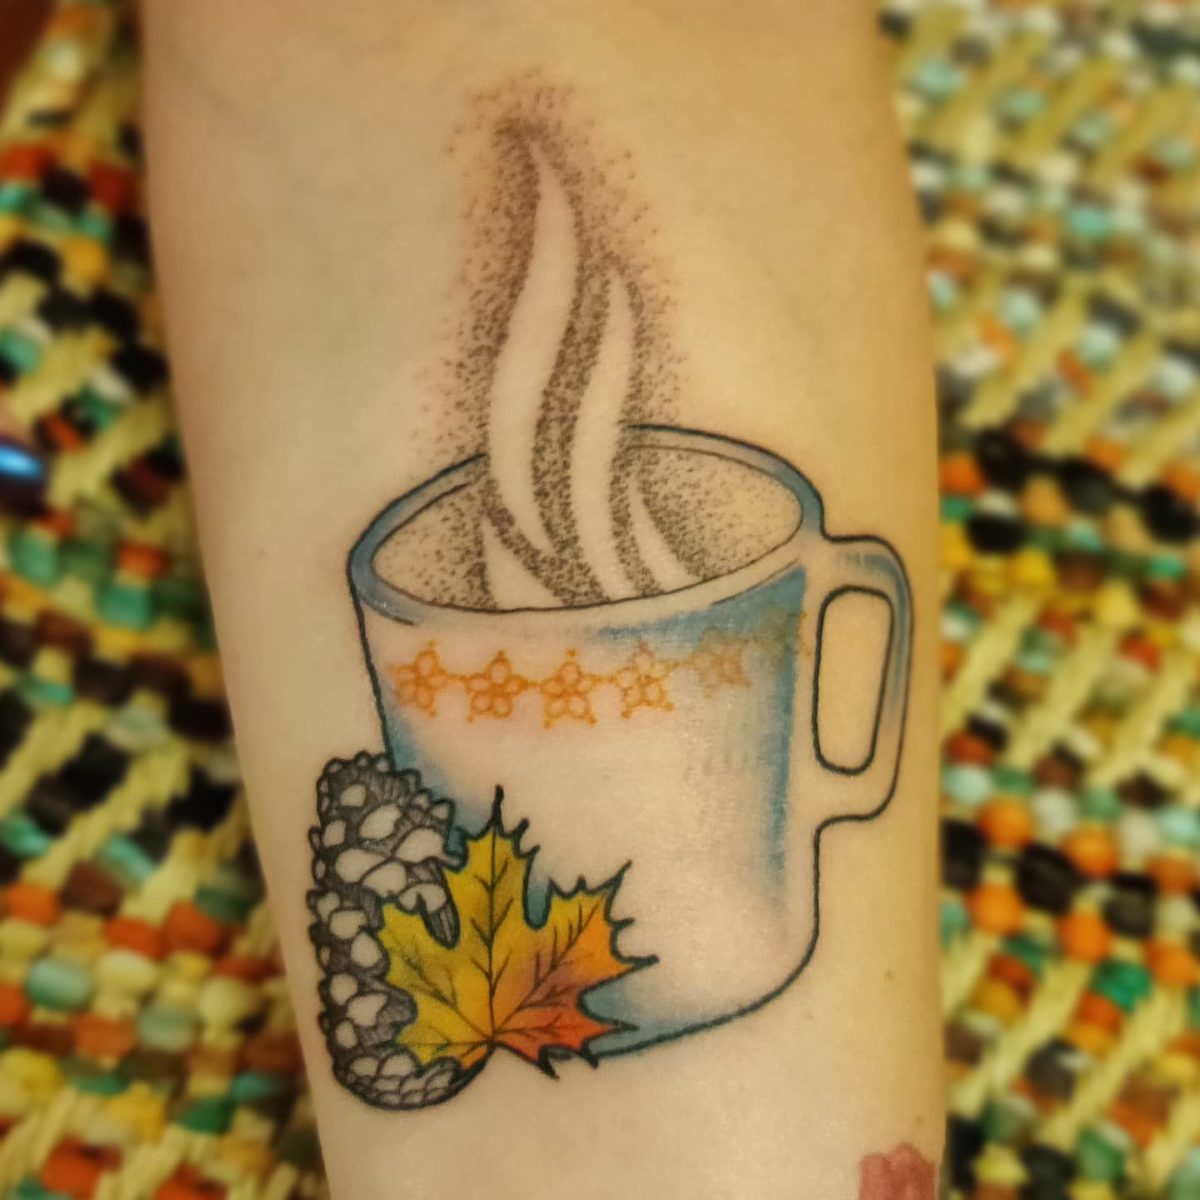 27 Tattoos for Those Who Love to Feast on Thanksgiving | Check out these amazing food tattoos that celebrate Thanksgiving.